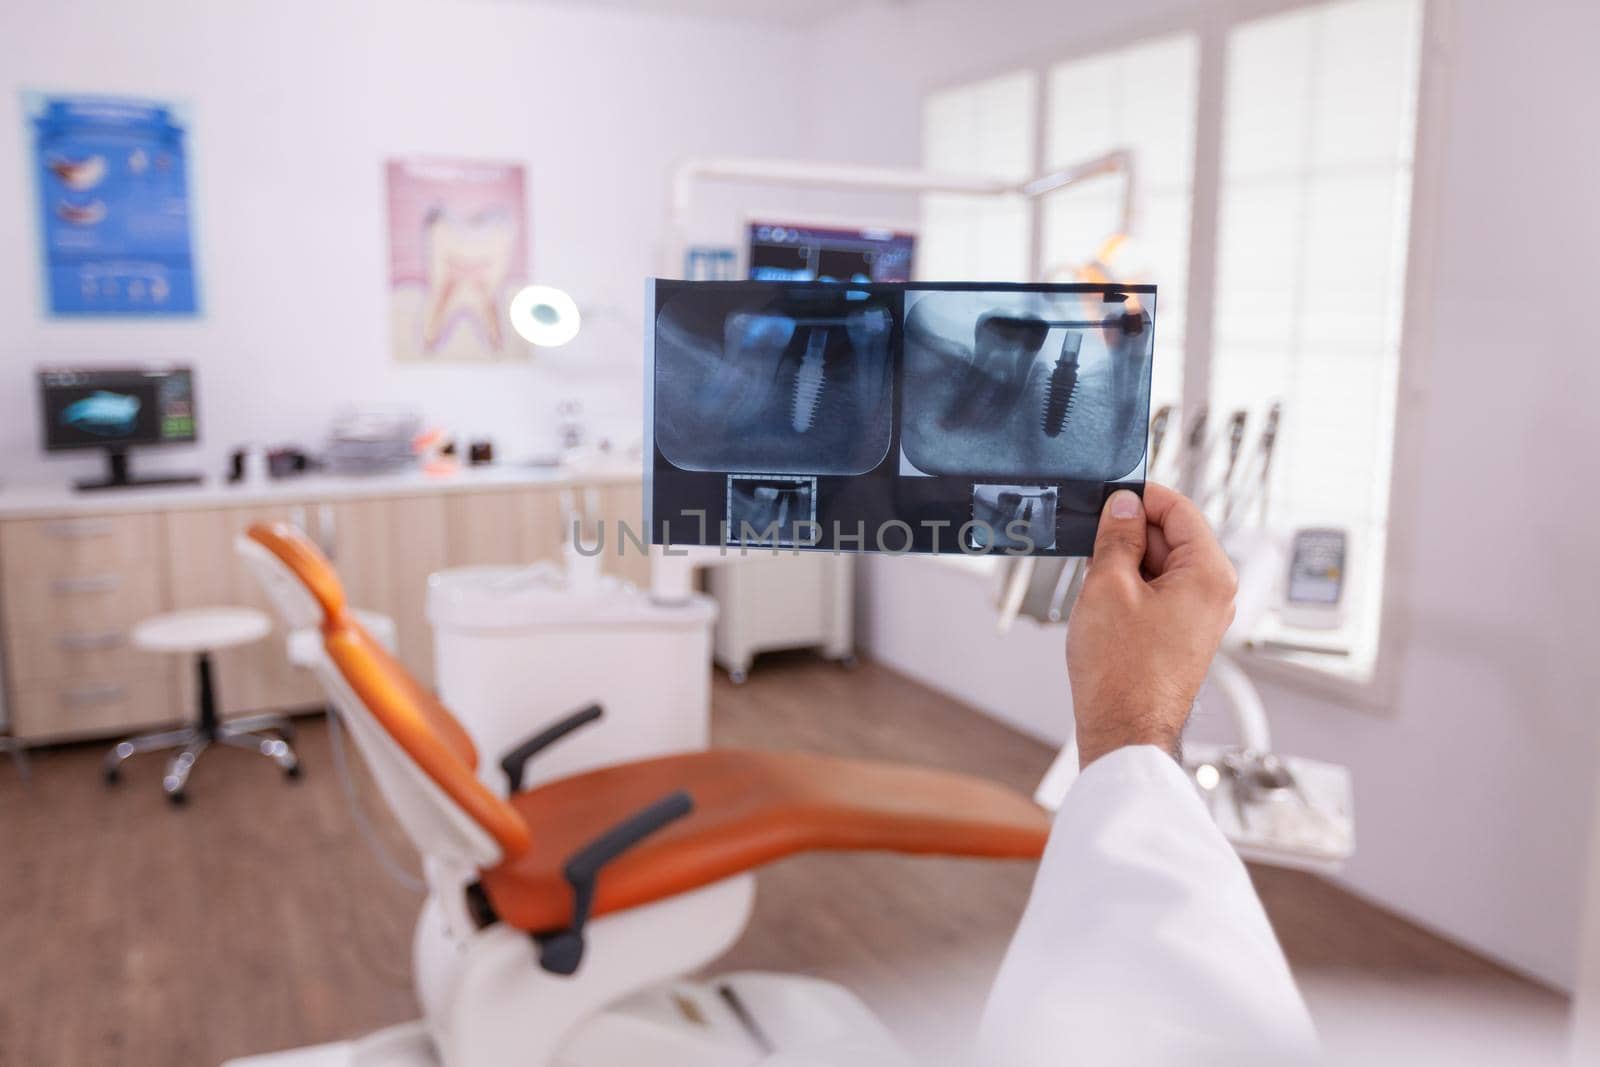 Orthodontist doctor holding medical teeth jaw radiography examining dental oral healthcare working in stomatology hospital office room. Dentistry xray professional expertise afetr tooth surgery